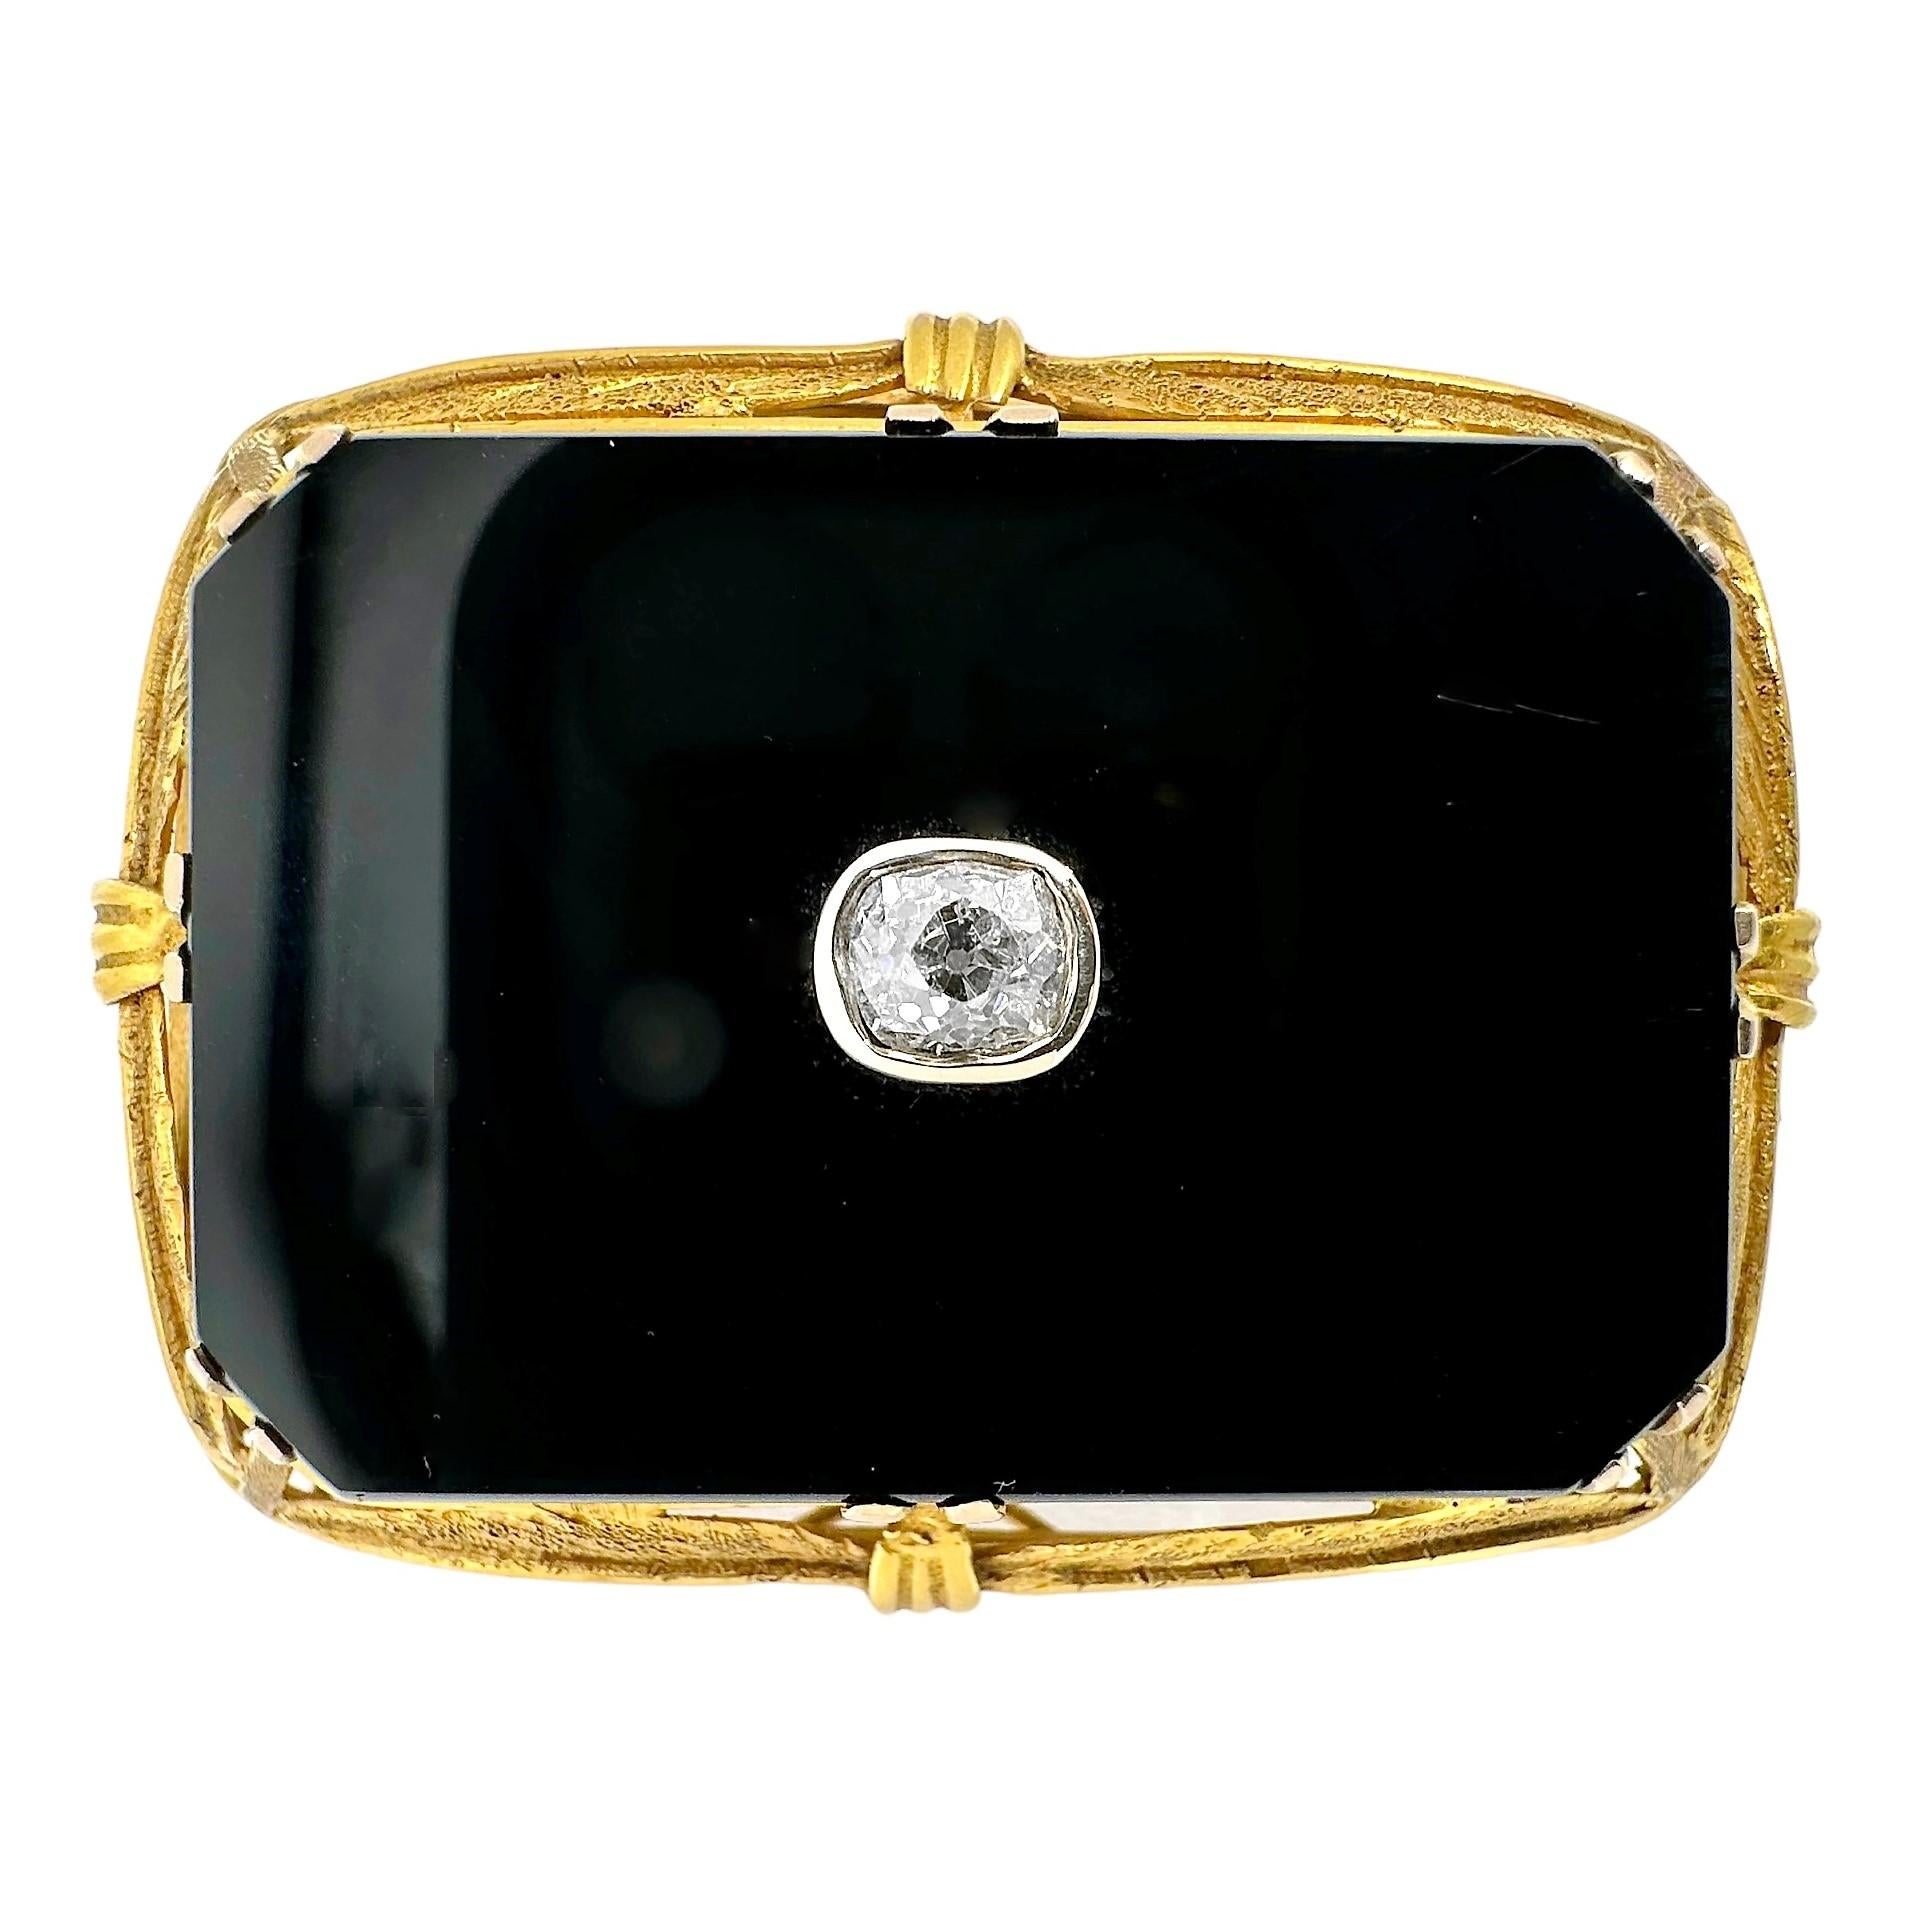 This wonderful and large Arts and Crafts Movement period 14k yellow gold, onyx, and diamond pendant/brooch, is entirely hand crafted and epitomizes aesthetic articles from that period, Based on it's style and components, we conclude that it was